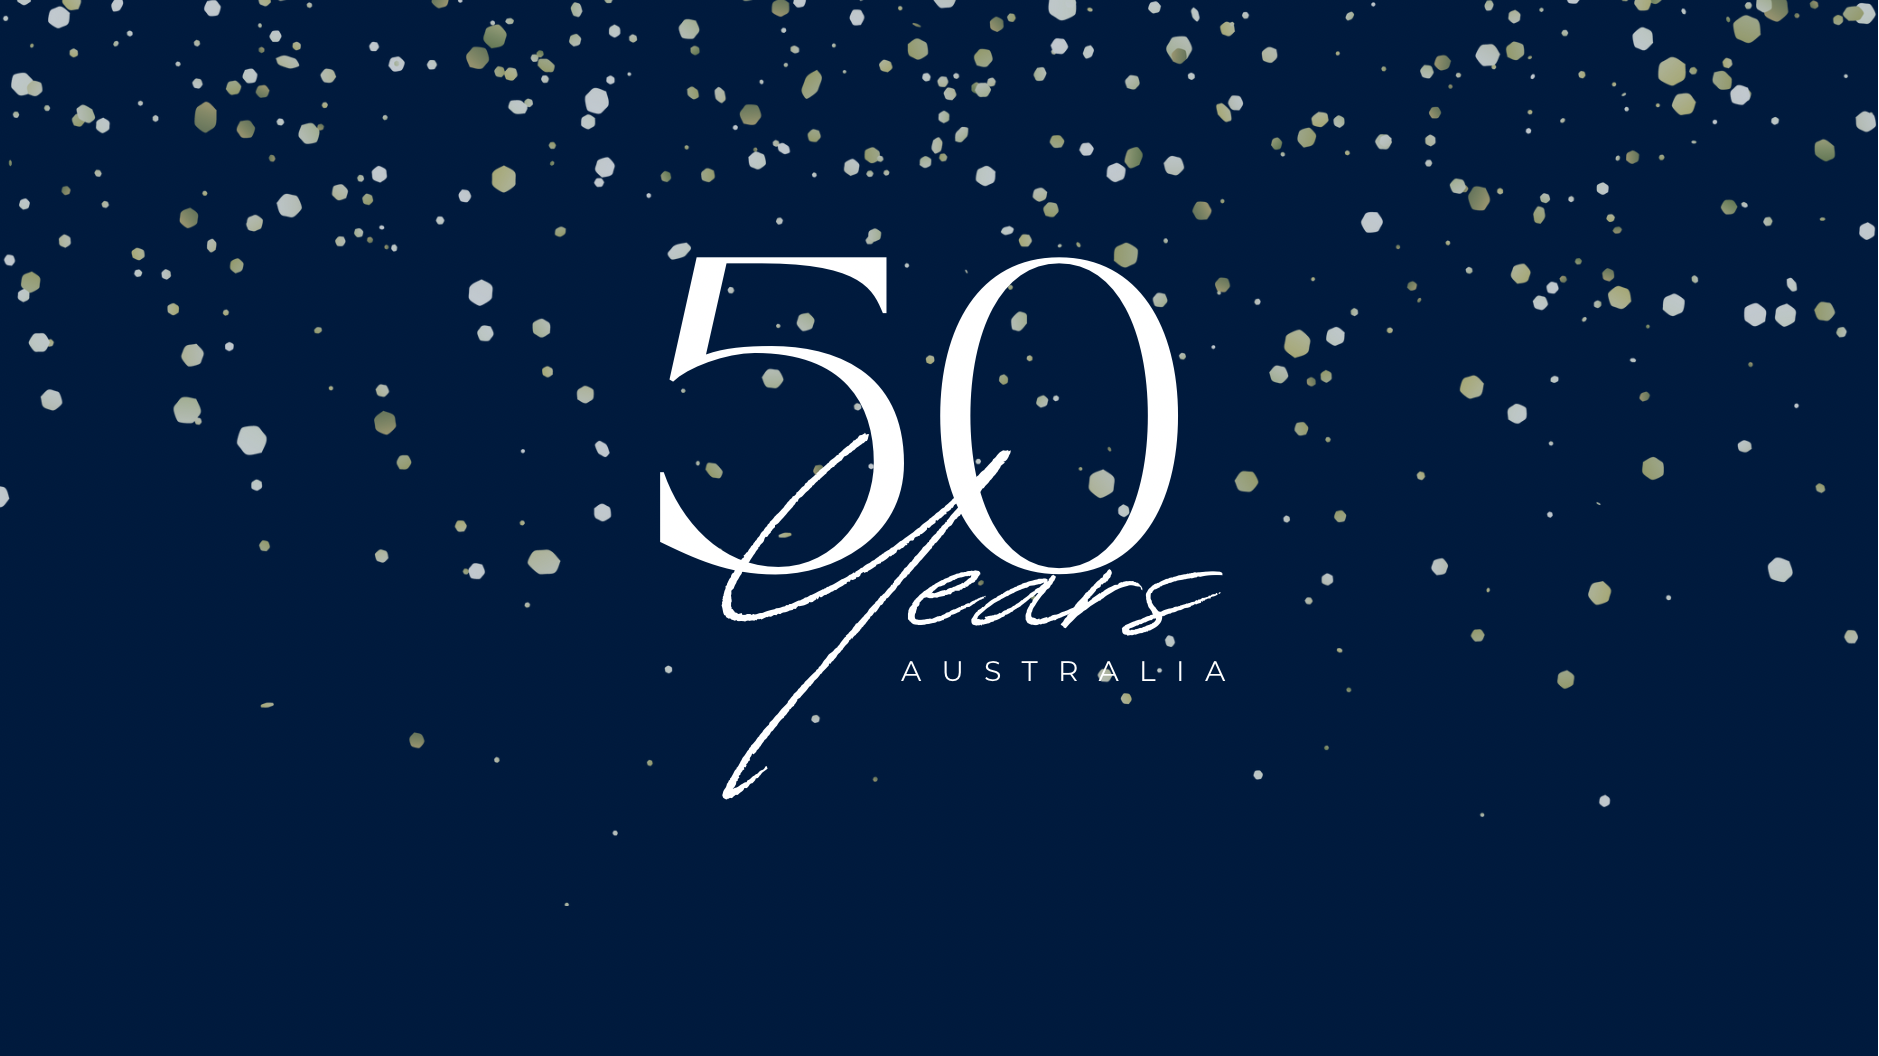 50 year Anniversary Reinforced Earth Australia in blue with white text and golf and white confetti